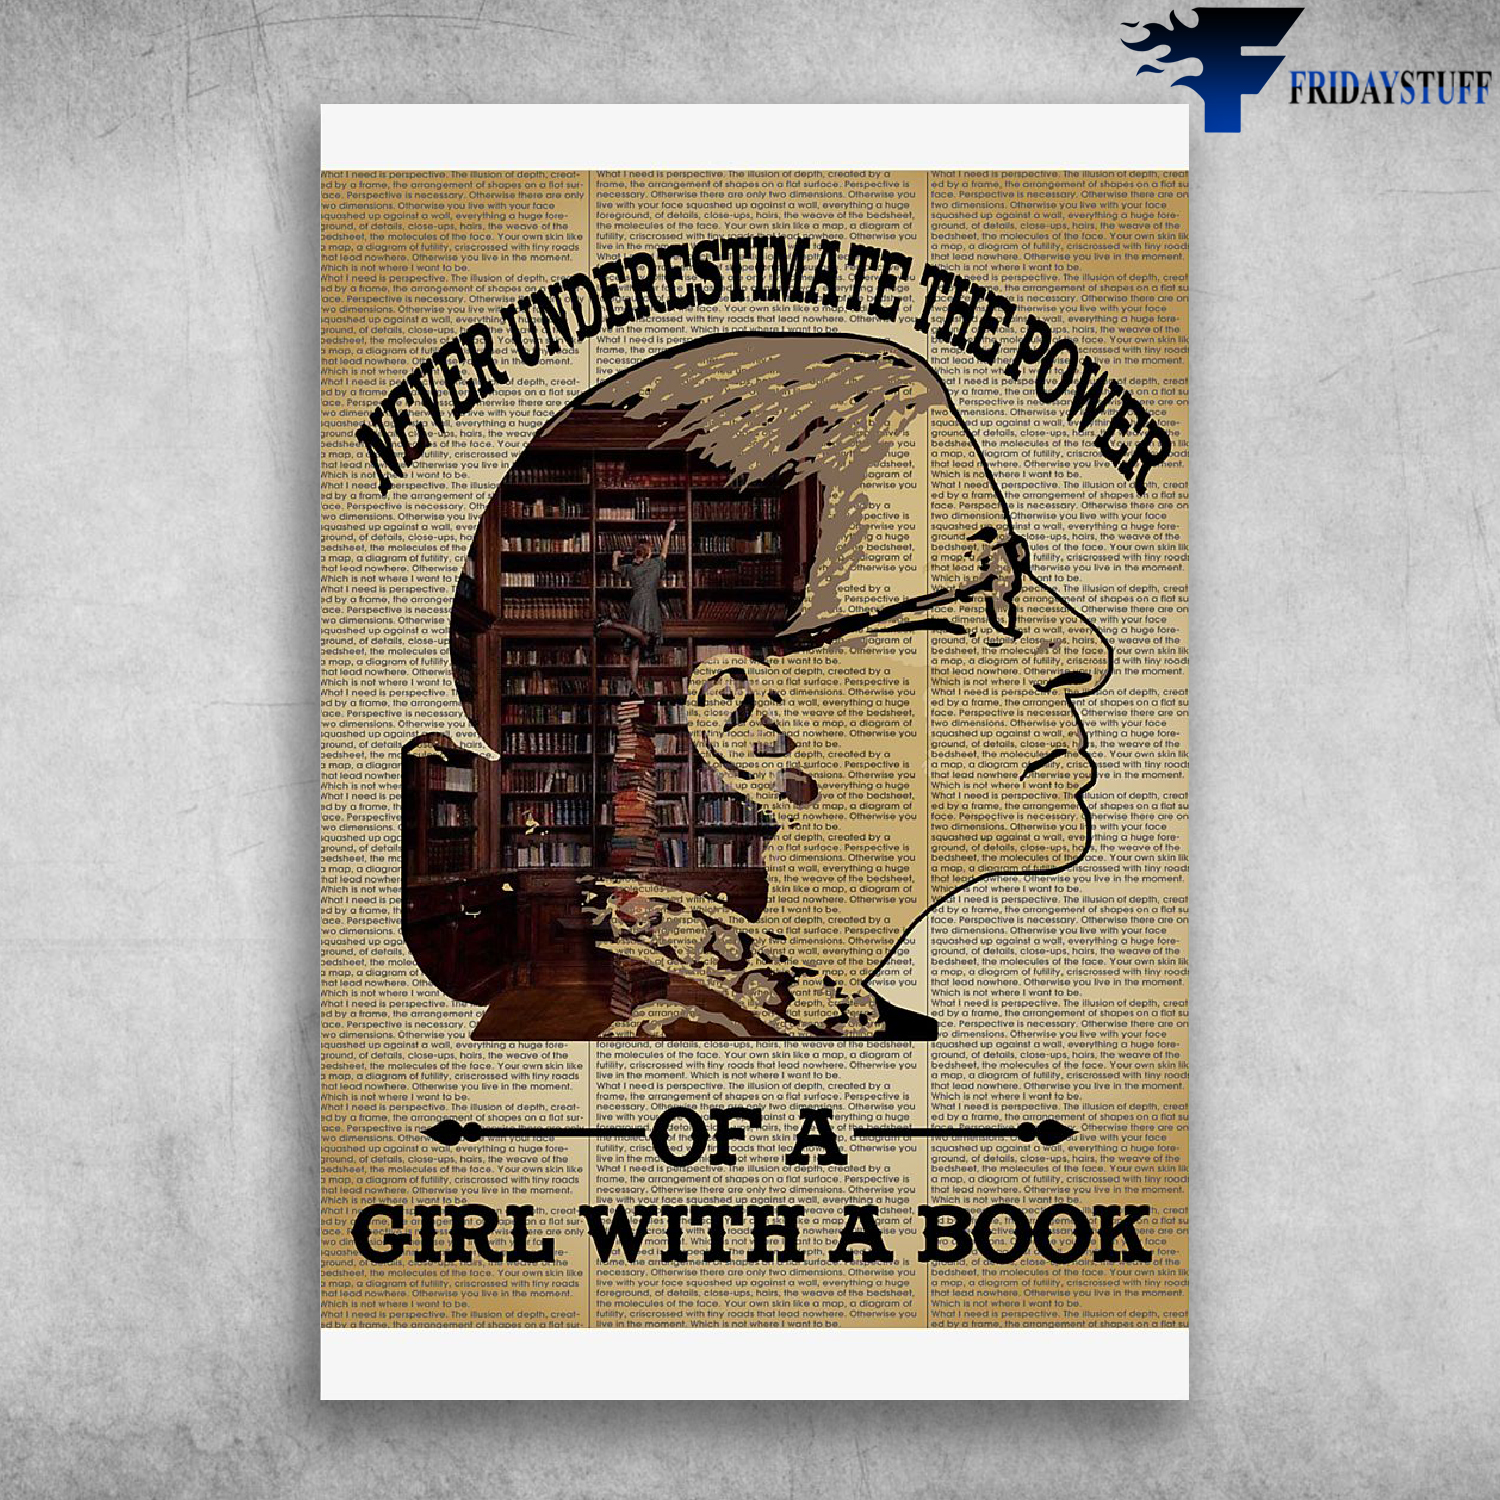 Ruth Bader Ginsburg - Never Underestimate The Power Of A Girl With A Book